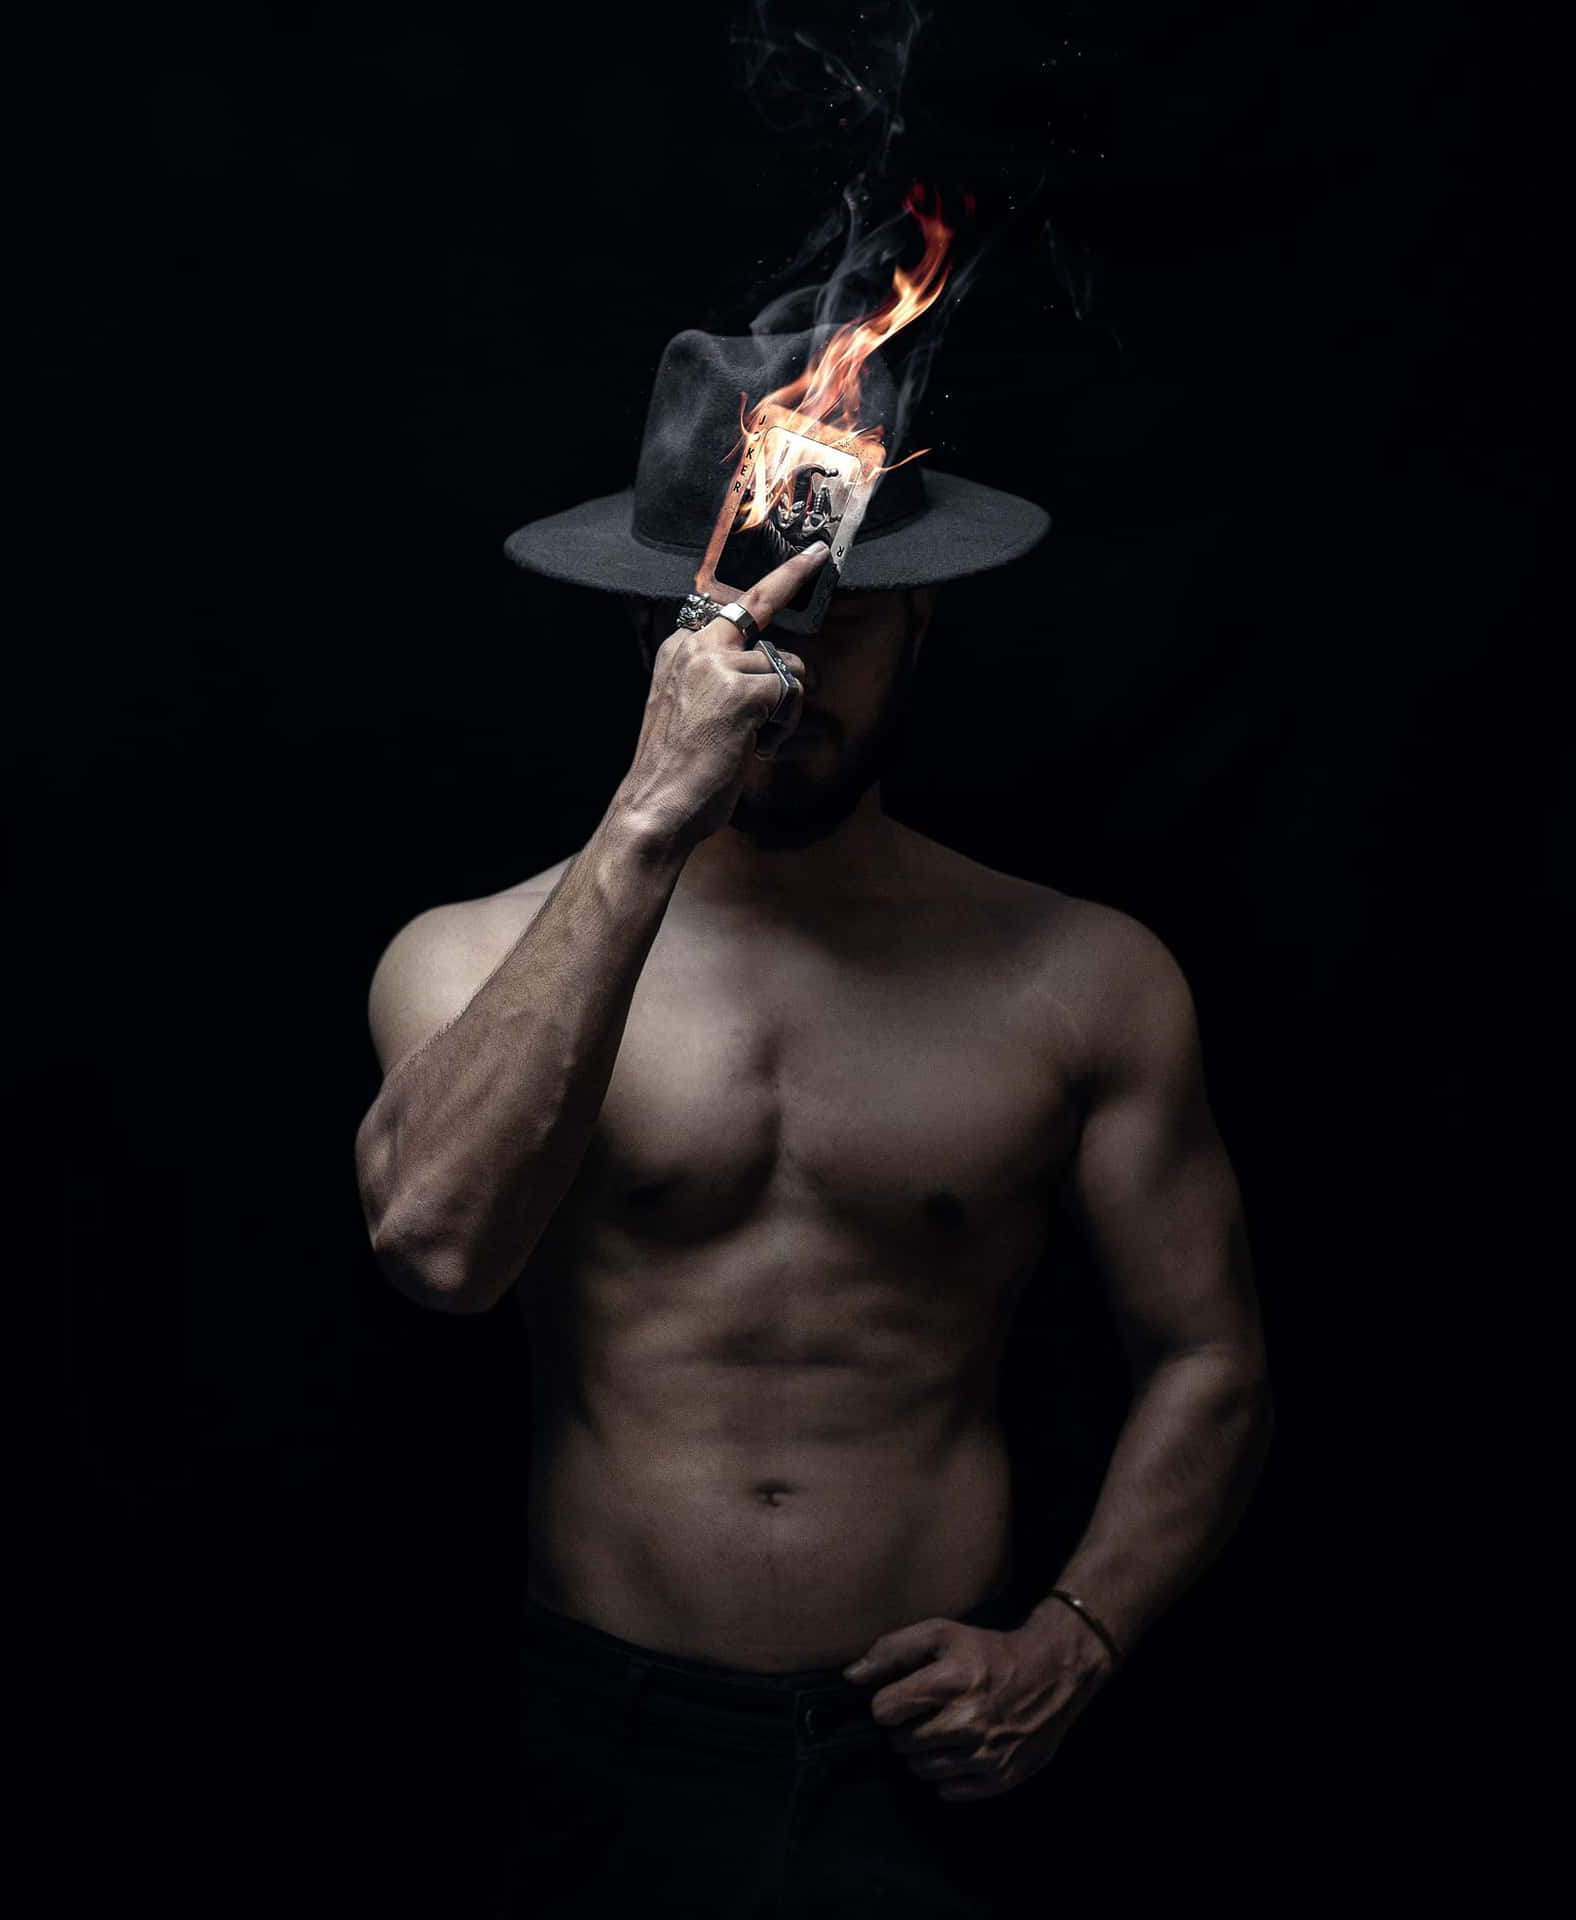 A Man In A Hat Holding A Fire